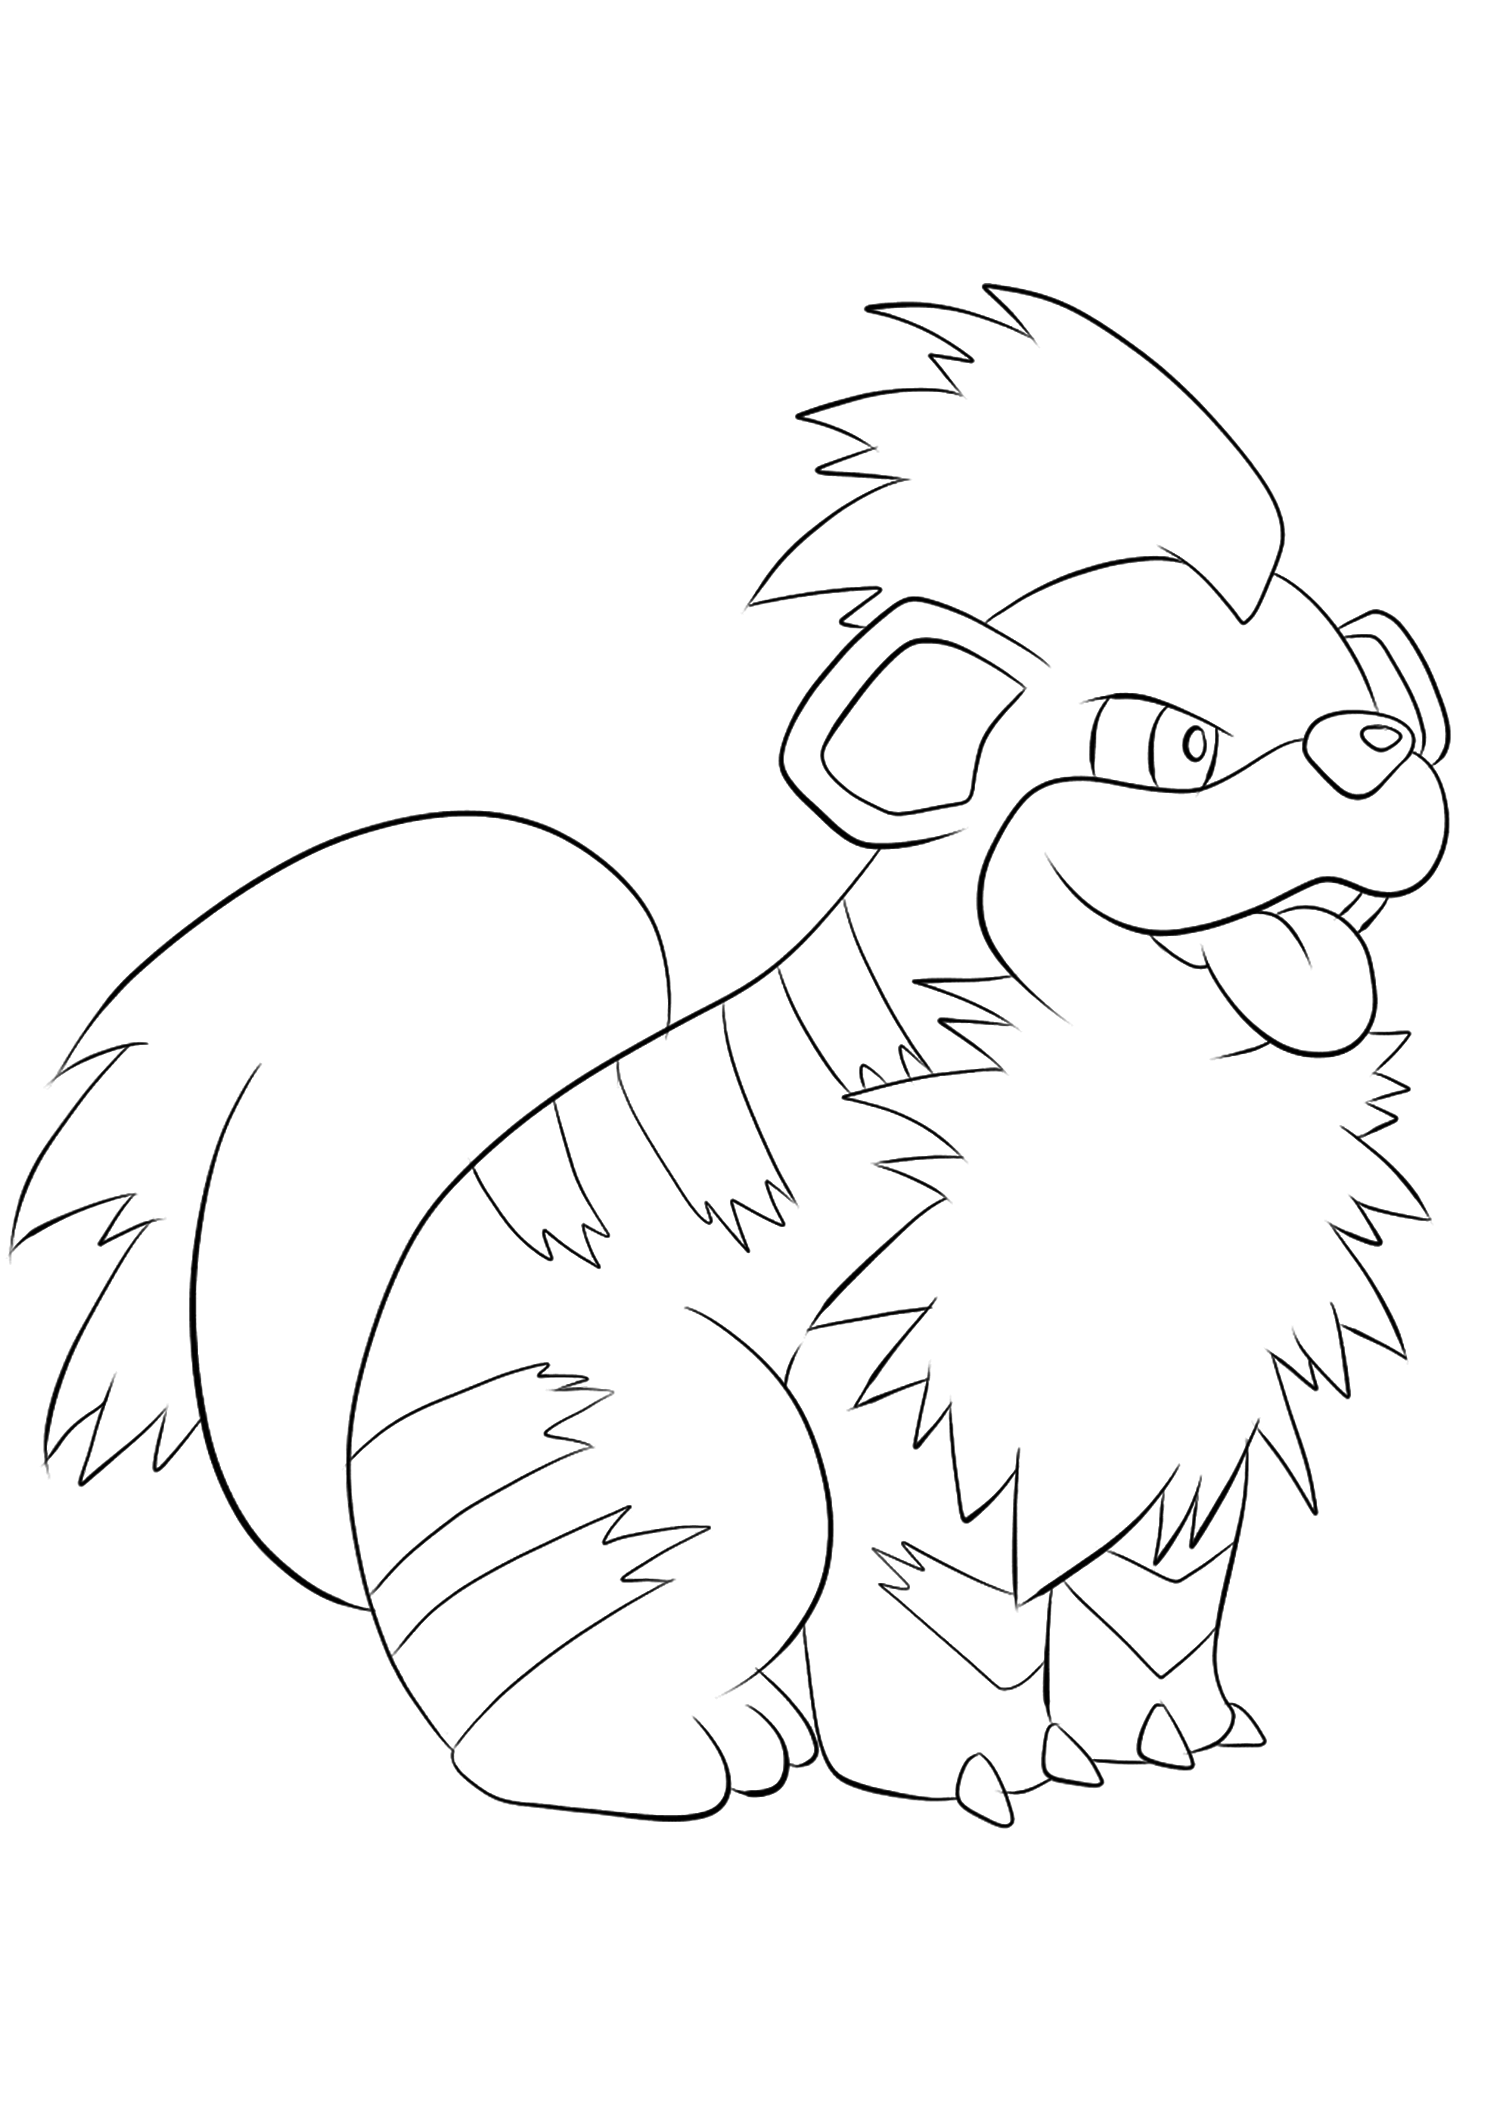 Growlithe No.58 : Pokemon Generation I - All Pokemon coloring pages Kids Coloring  Pages